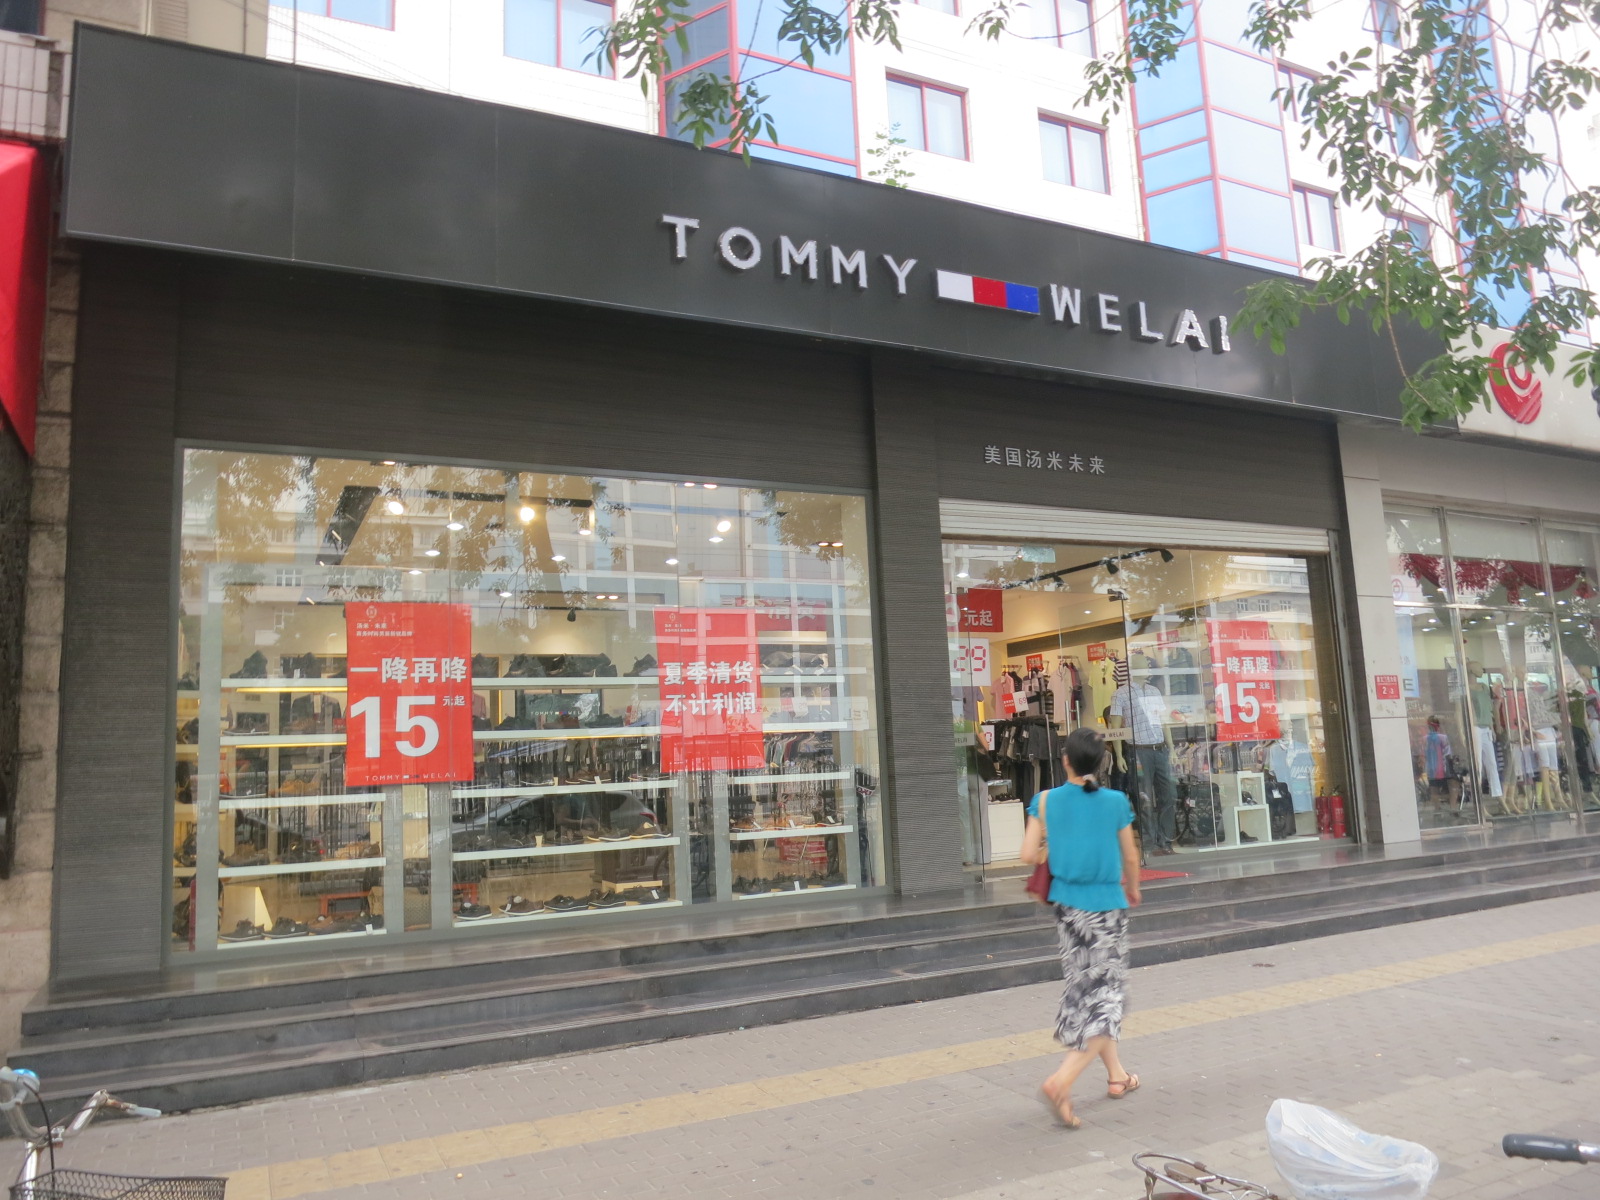 Tommy Hilfiger Inspired Store In Beijing - China Copycat Culture , HD Wallpaper & Backgrounds